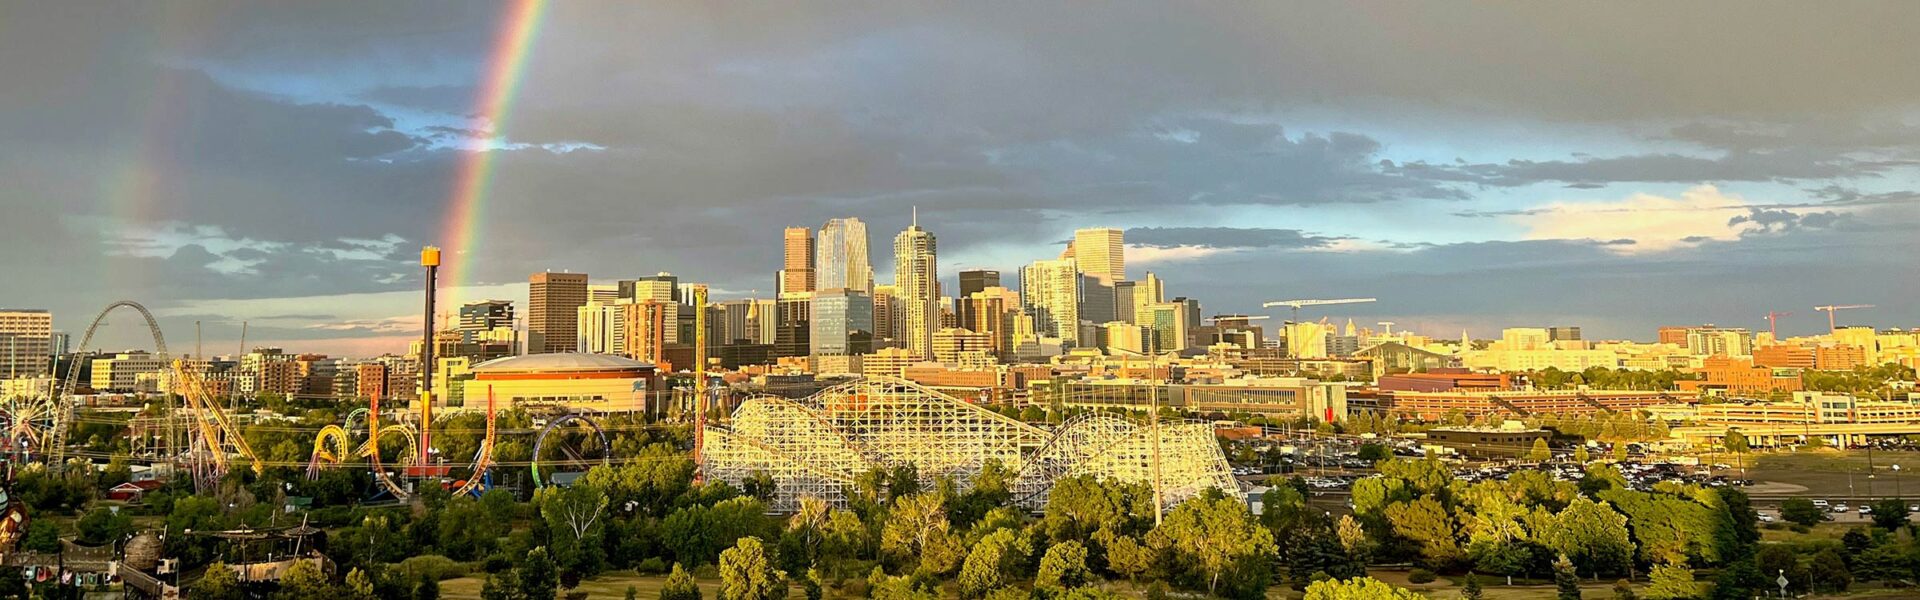 The skyline of Denver with an amusement park in the foreground and a double rainbow above.